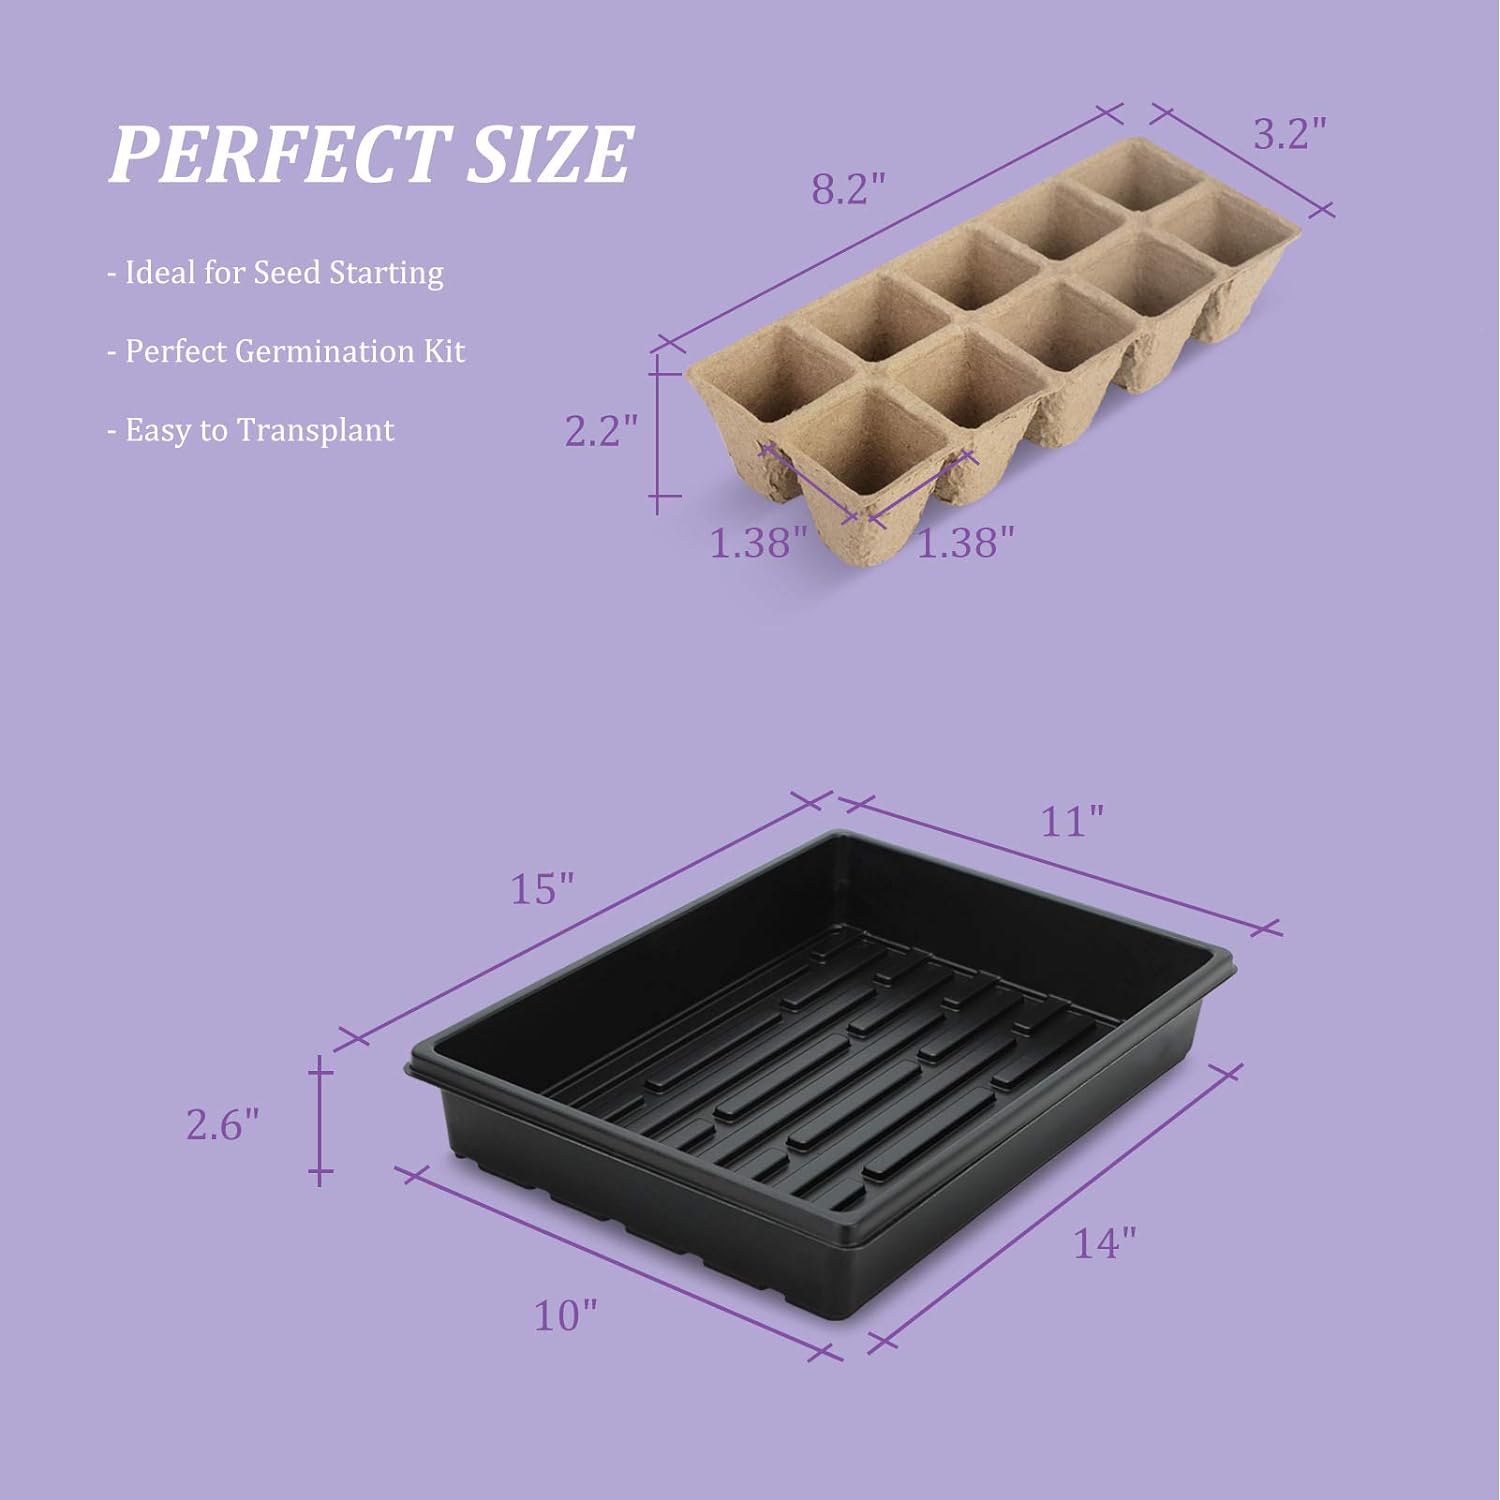 CEED4U Seed Starter Kit, 150 Cells Peat Pot Trays, 15x11 Inches Growing Trays, 15 Packs Plant Labels, Plant Cultivation Set for Gardeners, Classrooms, Greenhouse, DIY Projects